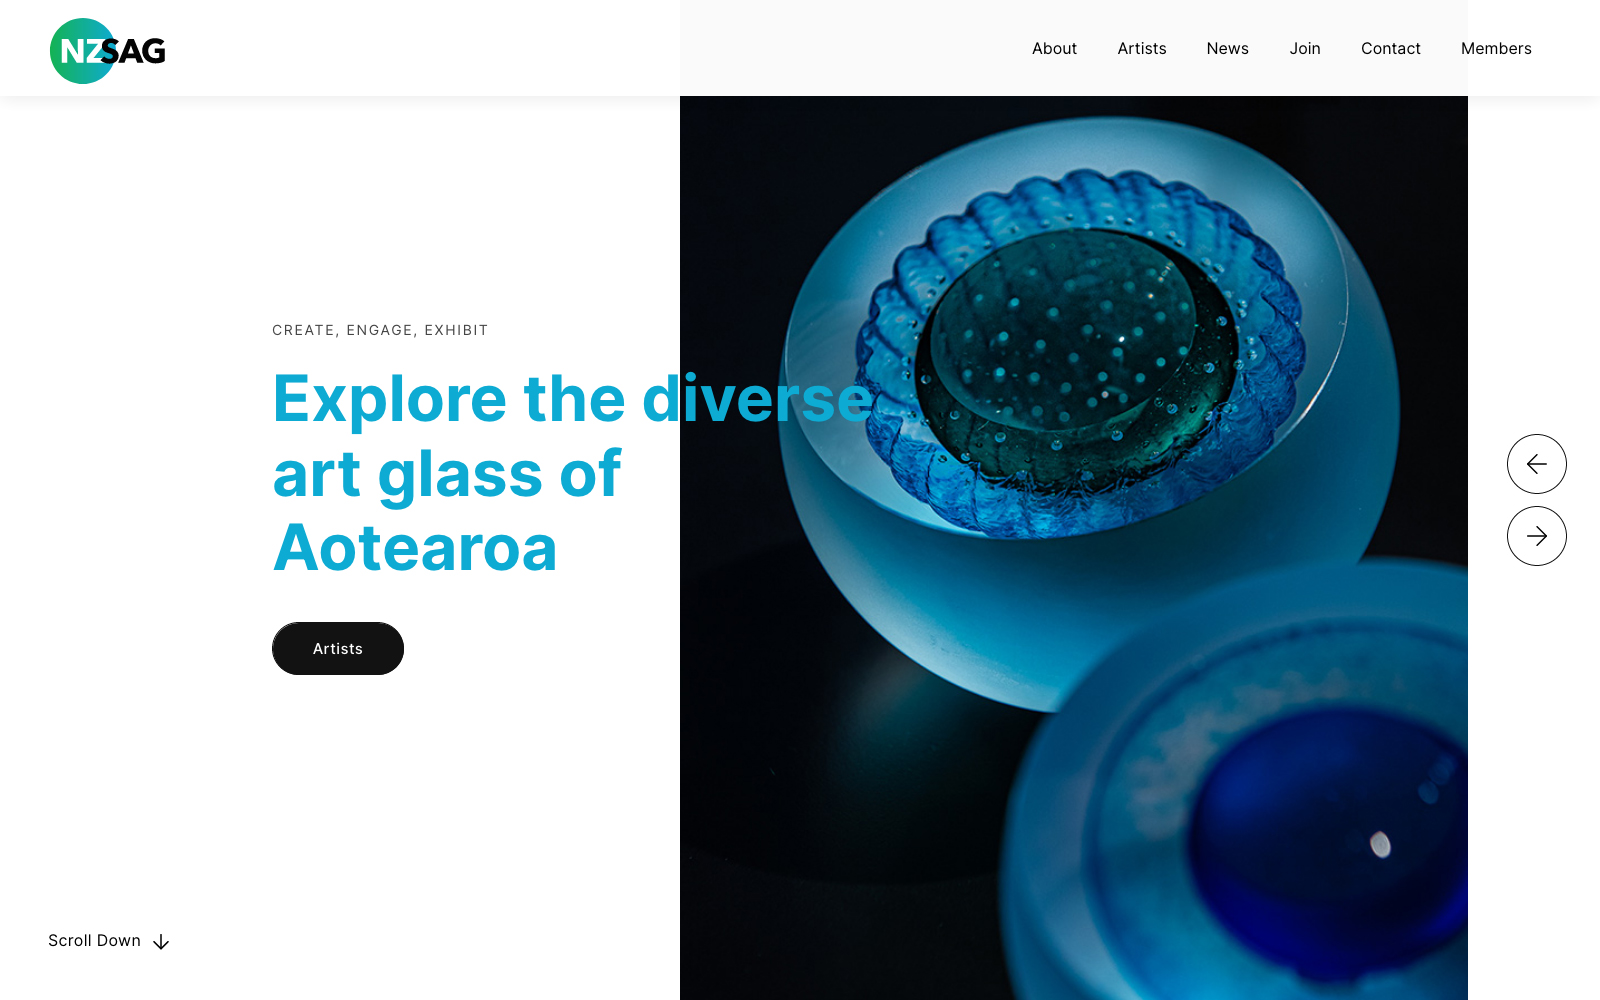 The New Zealand Society for Artists in Glass